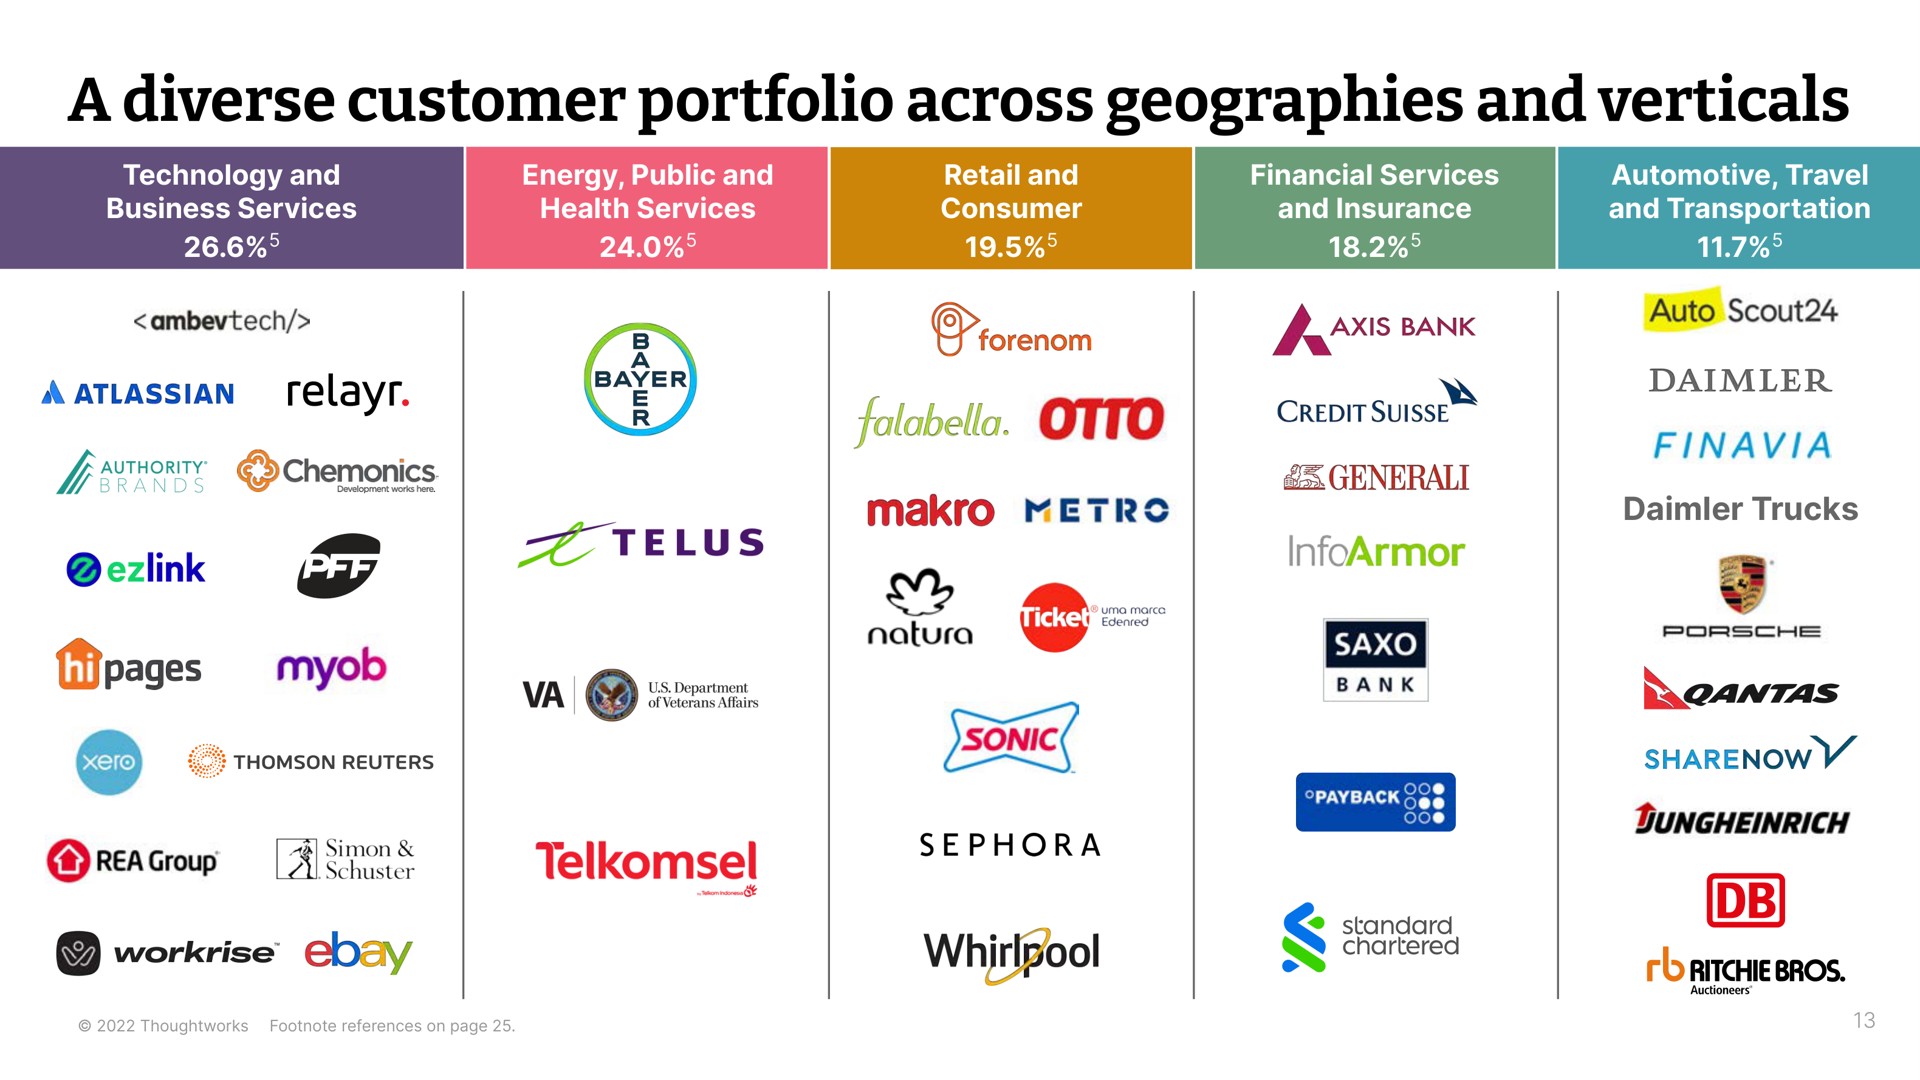 a diverse customer portfolio across geographies and verticals up secre | Thoughtworks